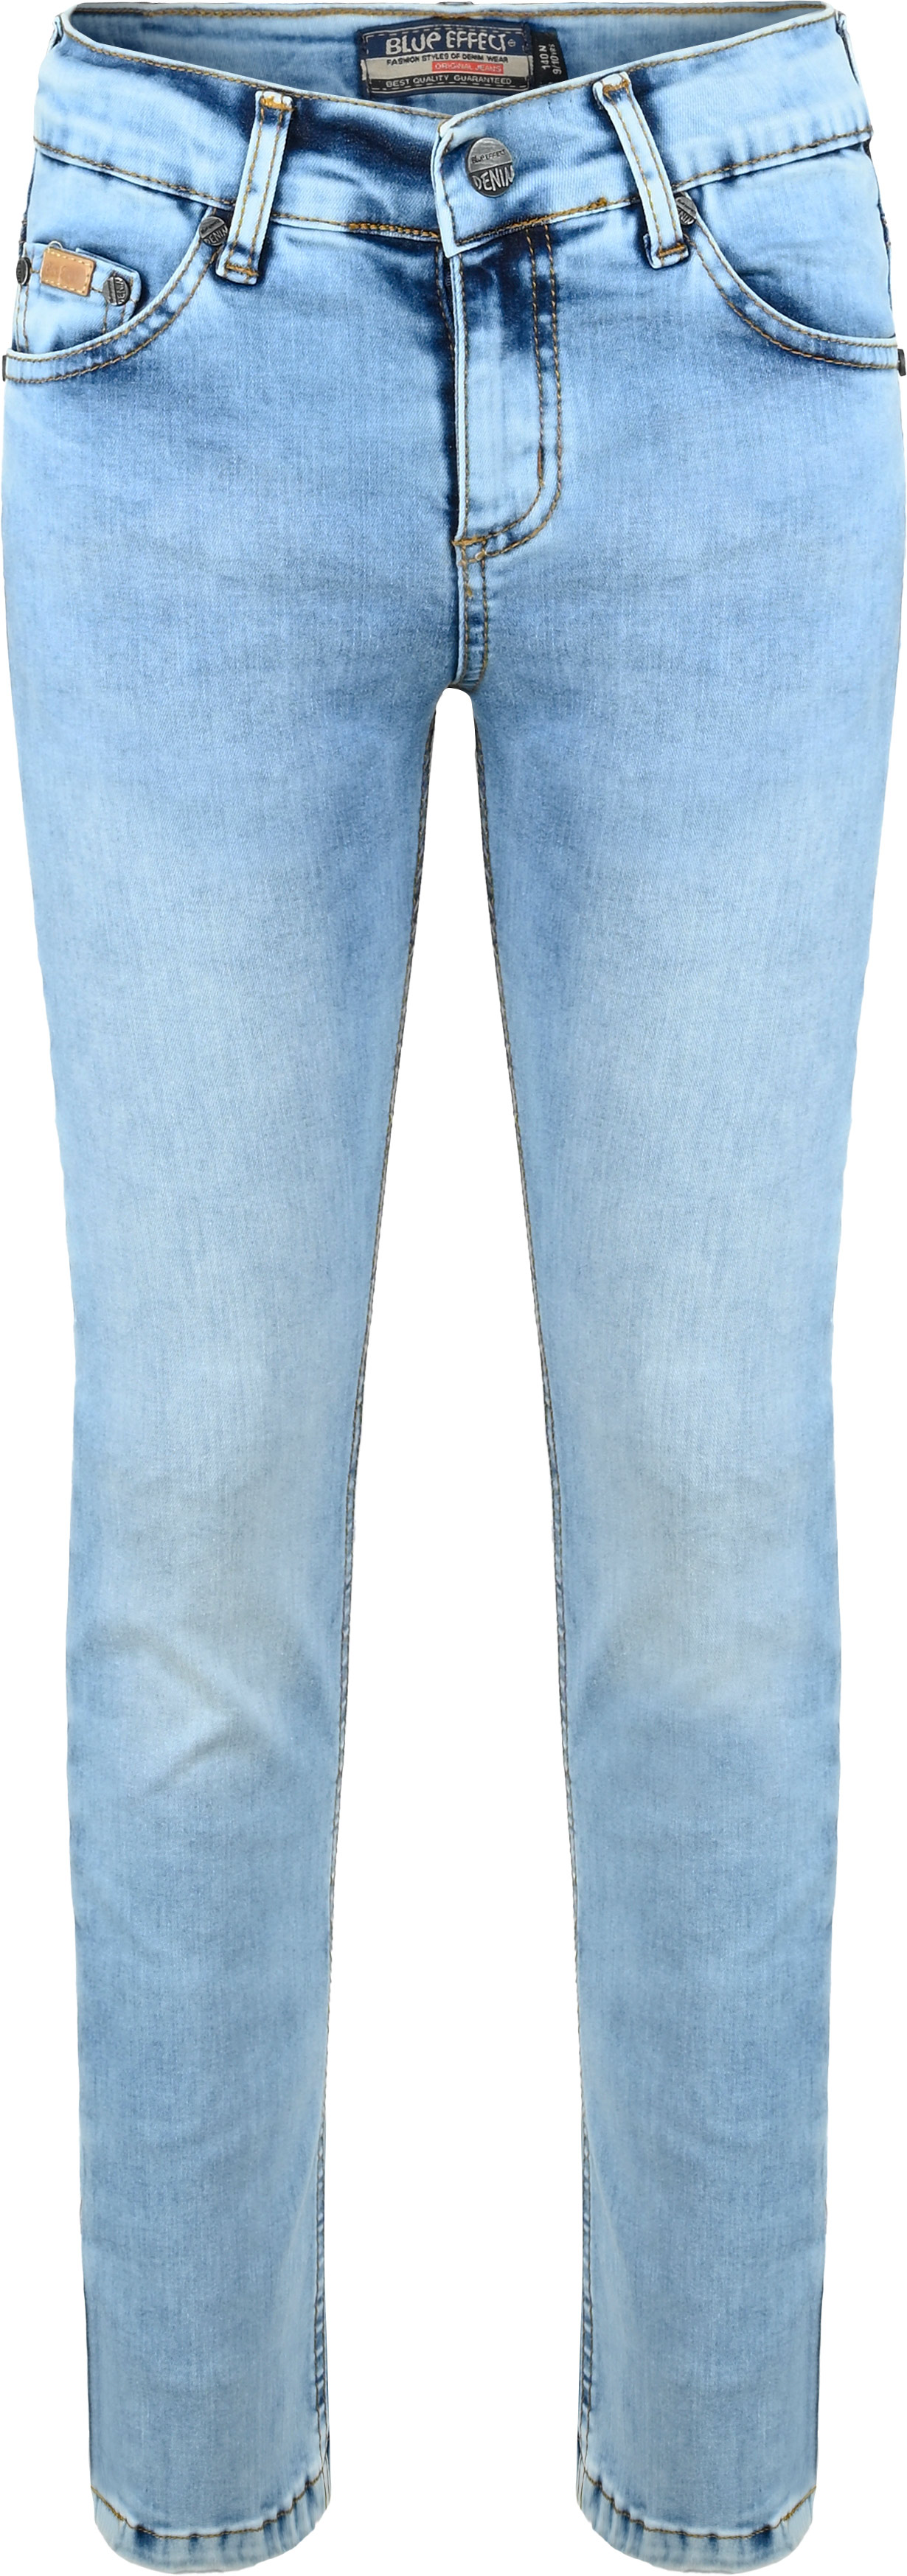 2833-Boys Relaxed Fit Jeans verfügbar in Slim, Normal